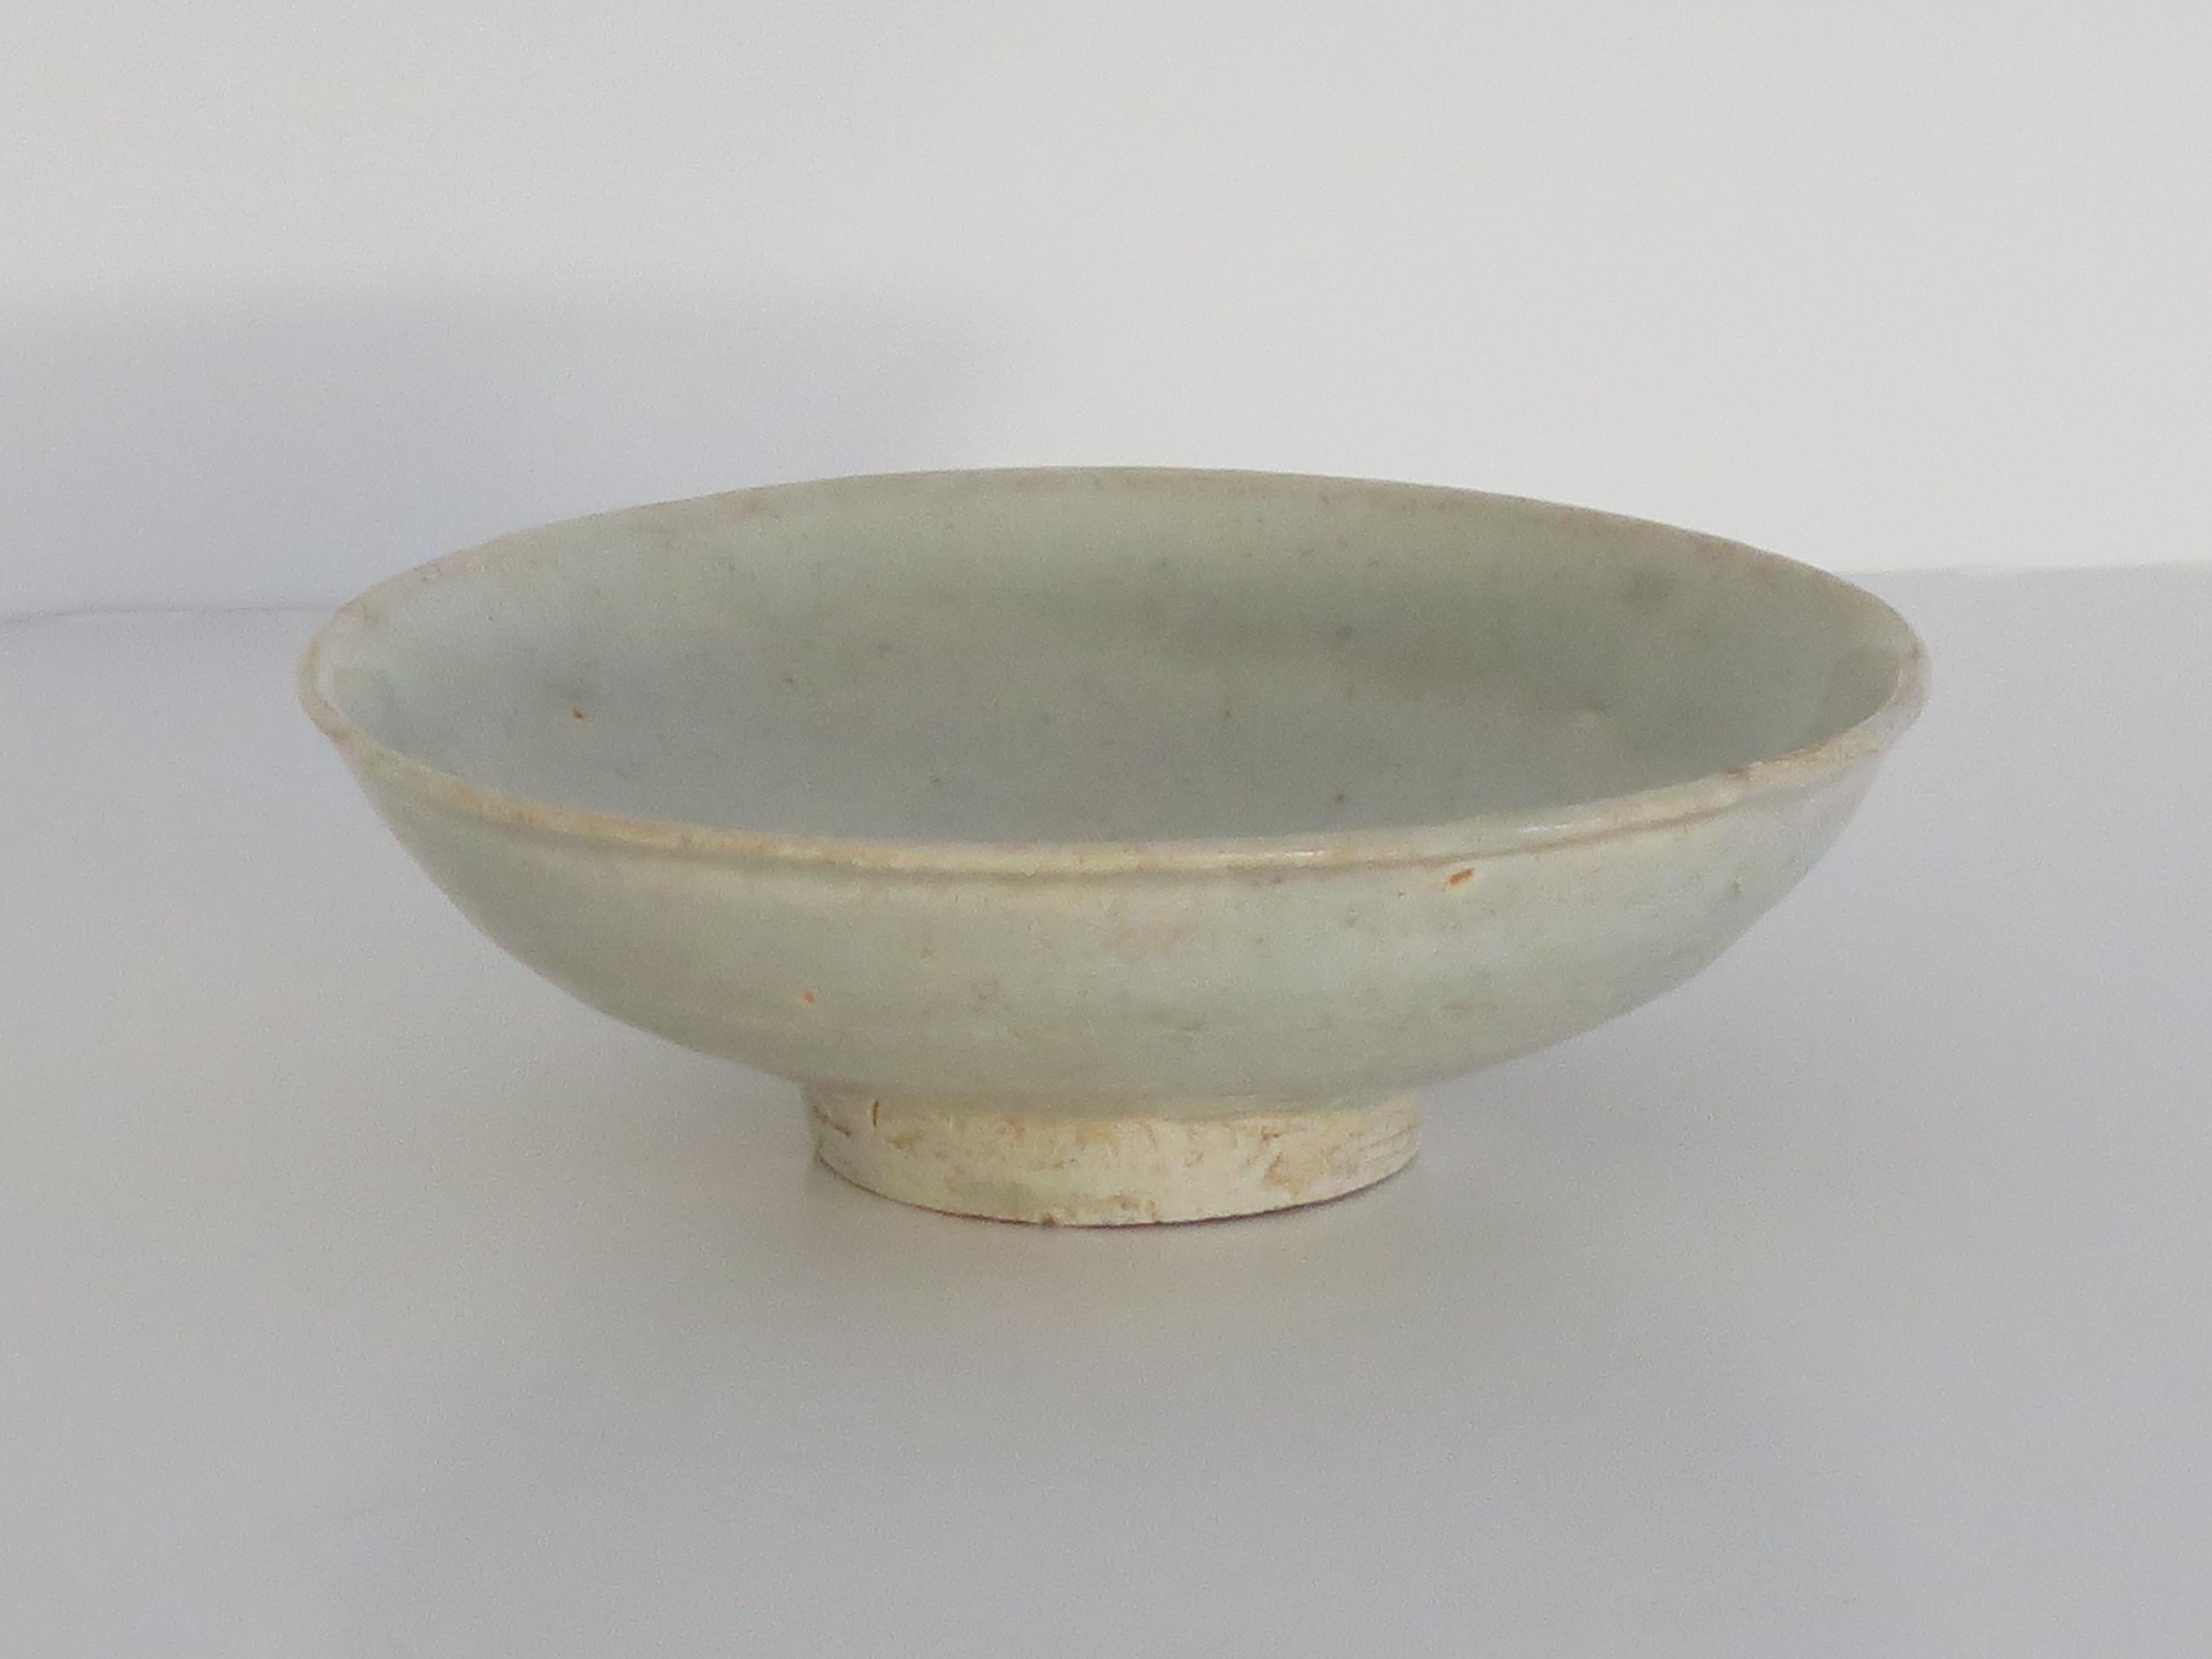 This is a very old interesting Chinese porcelain small Bowl of the Longquan Celadon type, which we date to the Yuan Dynasty ( 1279 to 1368) circa 1300, or possibly slightly earlier, back to the Southern Song period. ( 1127 to 1279)

The bowl is well